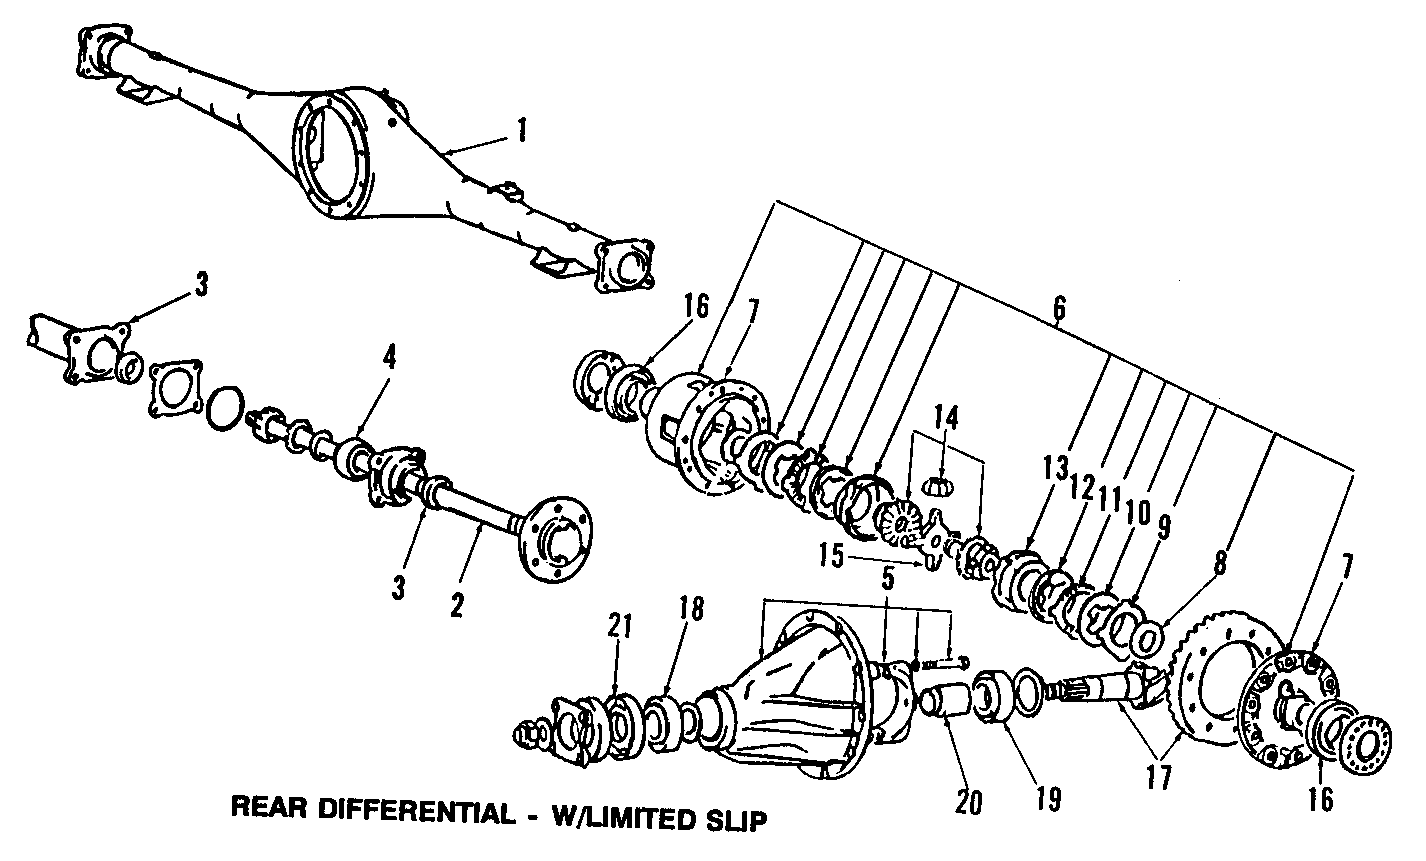 REAR AXLE. DIFFERENTIAL. PROPELLER SHAFT.https://images.simplepart.com/images/parts/motor/fullsize/T031470.png